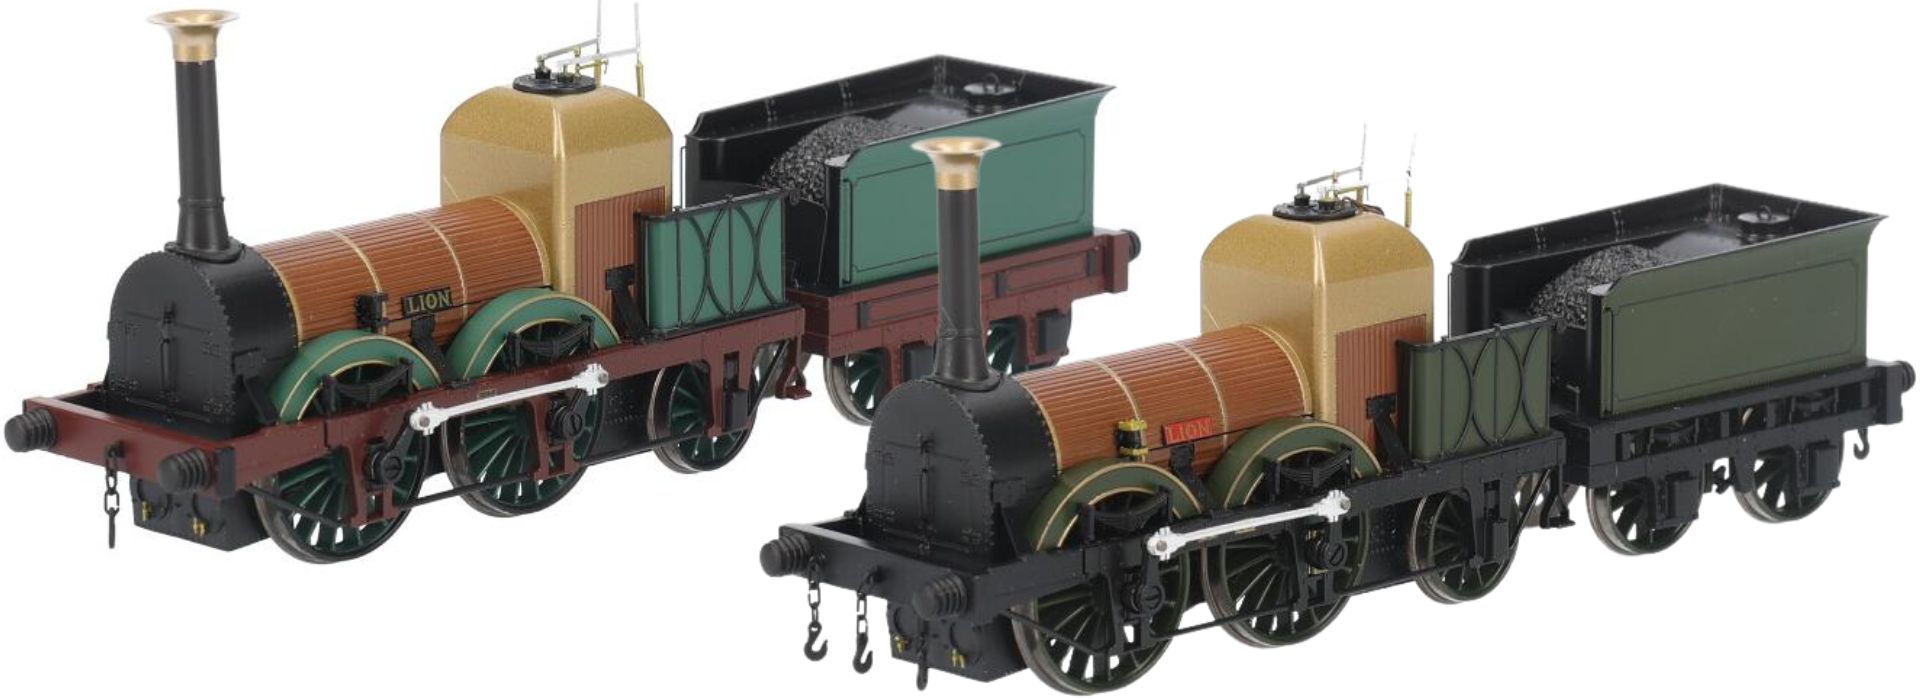 Rapido Trains UK OO Gauge (1:76 Scale) 0-4-2 Liverpool & Manchester 'Lion'/ 'Tiger'